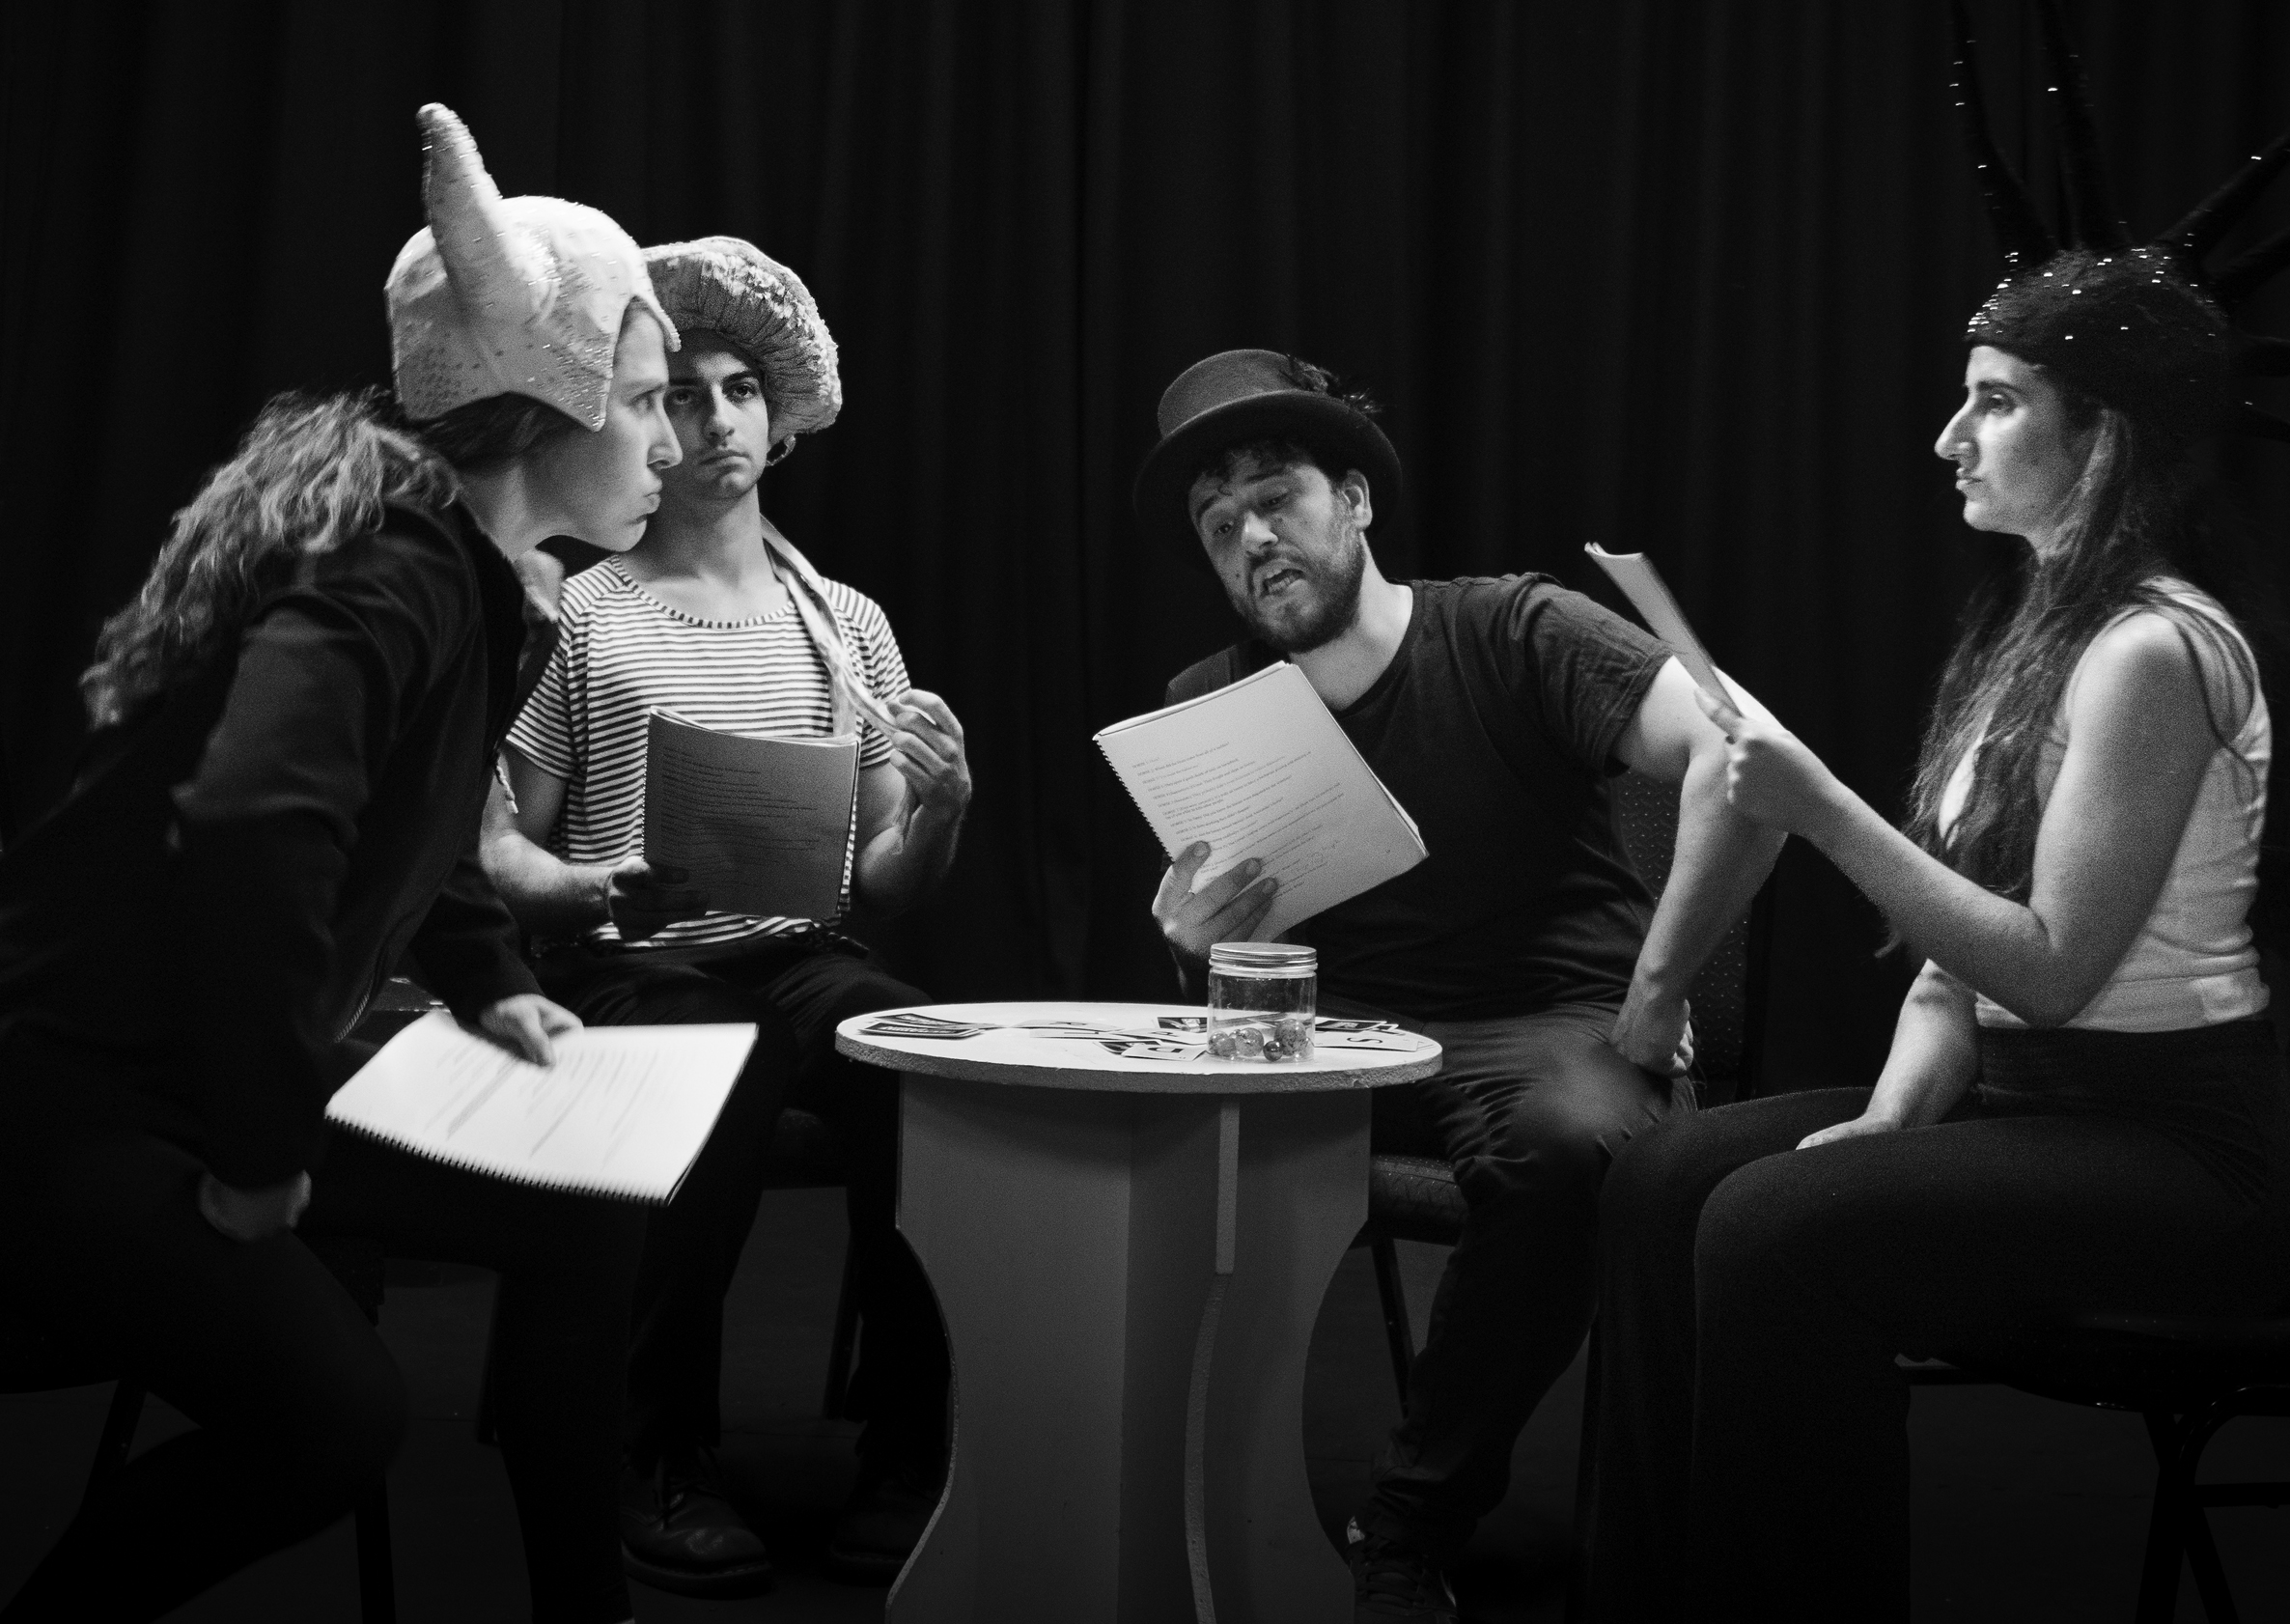 A black and white image of 4 people on stage. They all wear different hats. The woman on the far left looks across at the woman on the far right with an angry expression on her face. The man next to her on her right looks out to the middle distance. The man next to him reads from a script. And finally the last woman on the right holds a script and looks at the woman on the left.